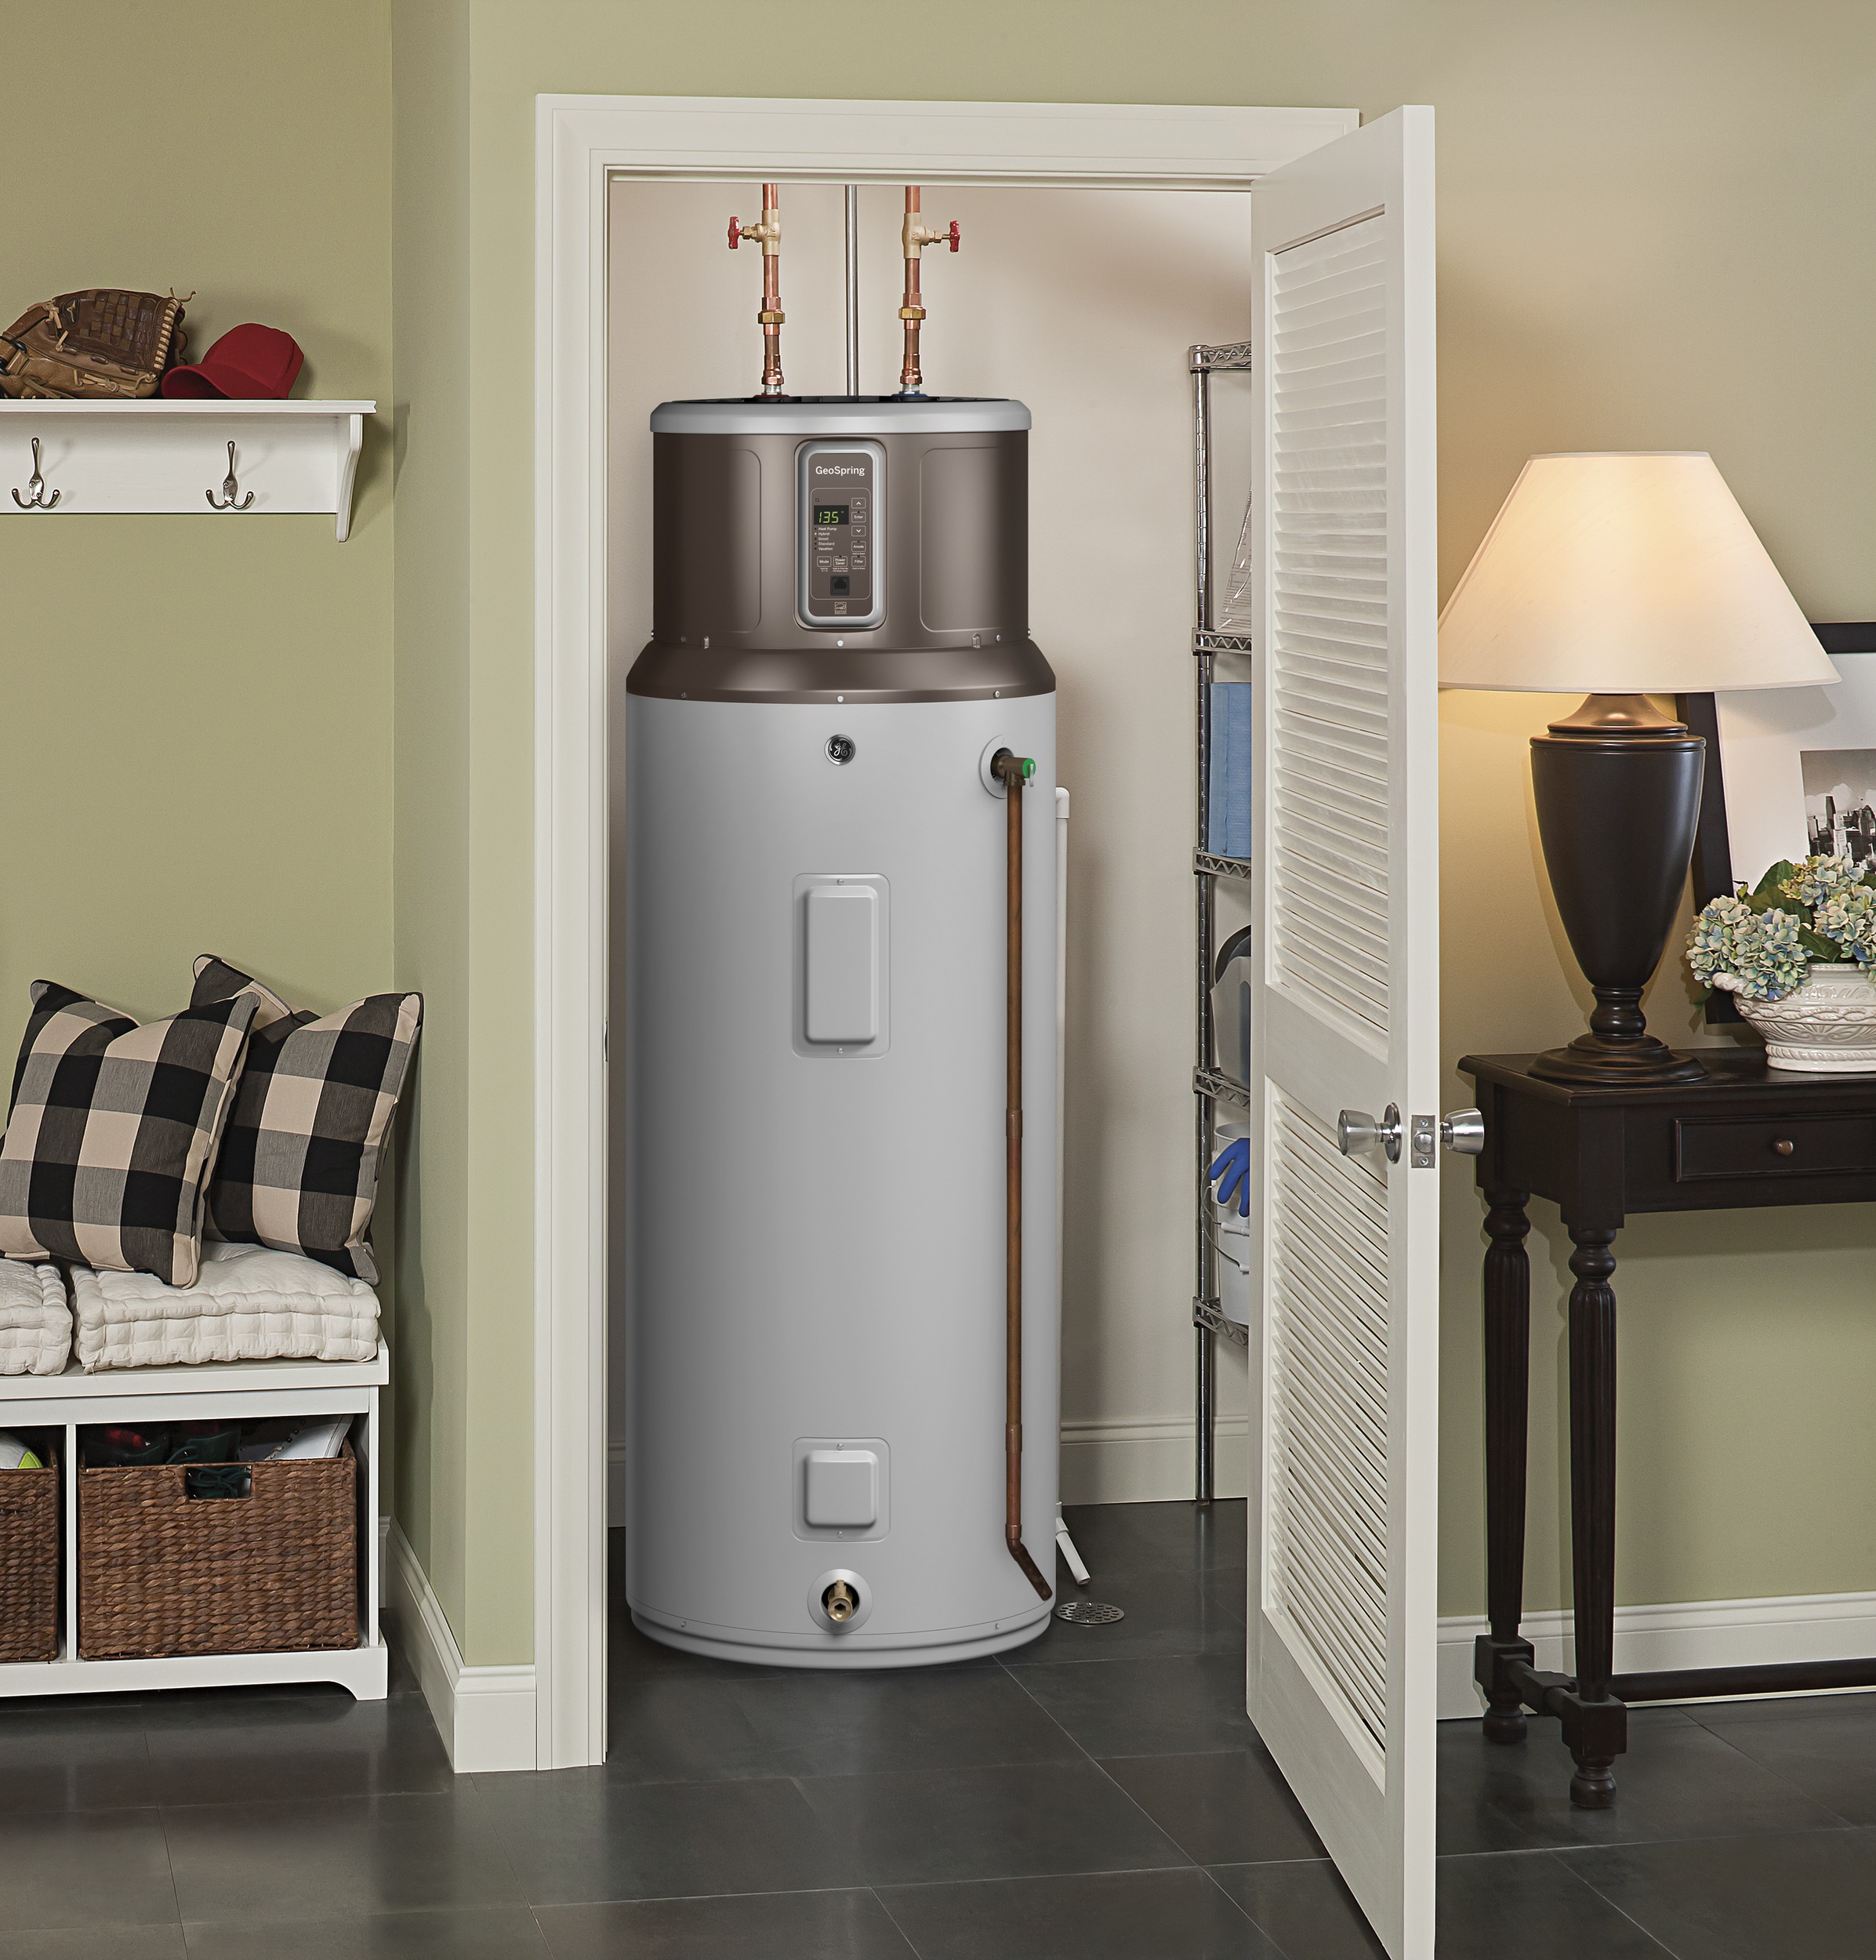 12-best-hybrid-water-heaters-reviewed-and-rated-in-2022-2022